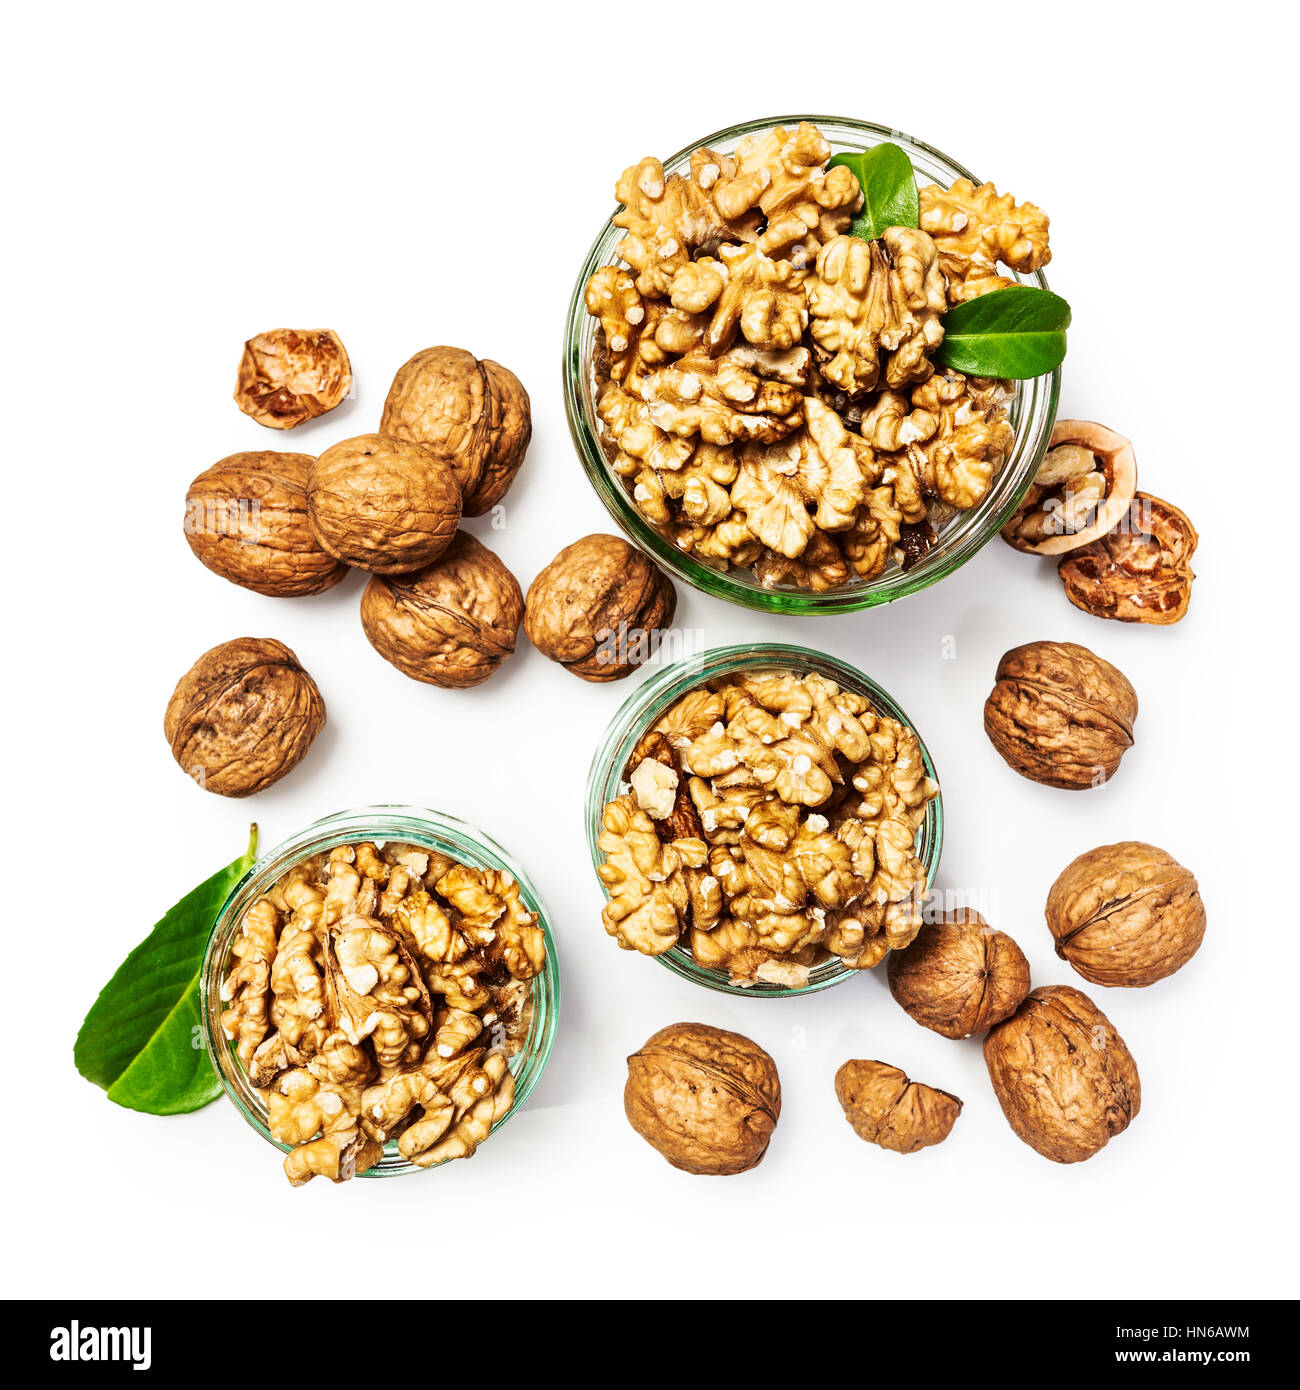 Walnut kernels in glass bowl, whole walnuts and nutshells as healthy eating and dieting concept, group of objects isolated on white background Stock Photo